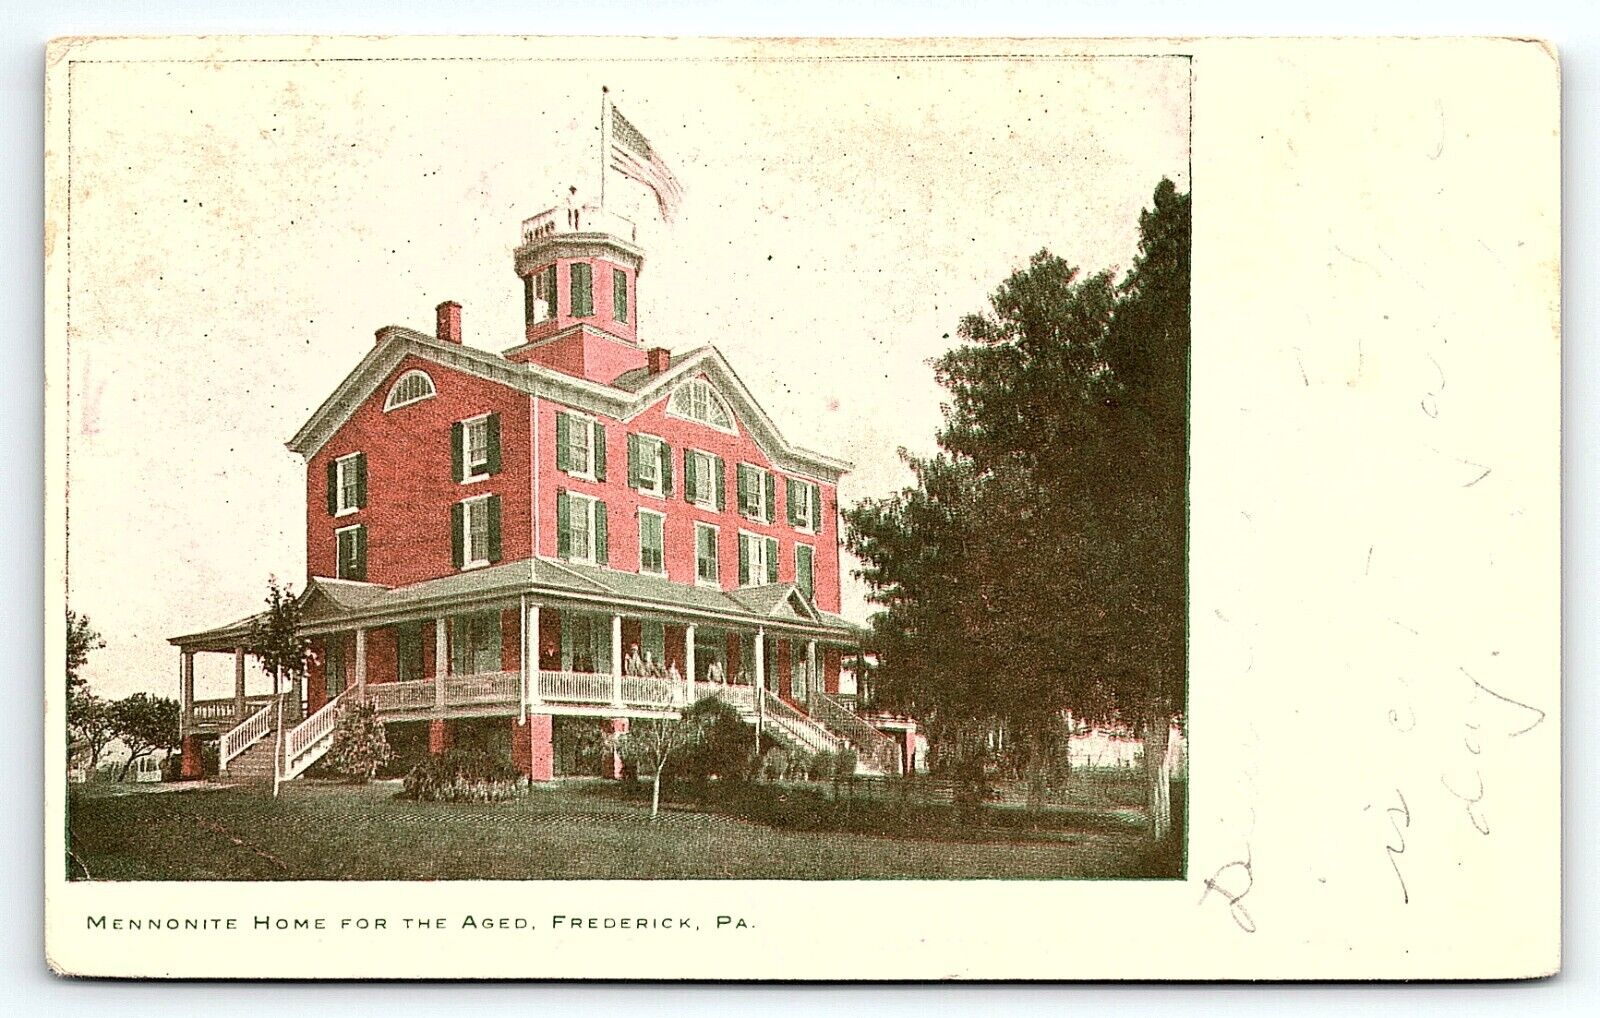 1907 FREDERICK PA MENNONITE HOME FOR THE AGED HAND TINTED EARLY POSTCARD P4114